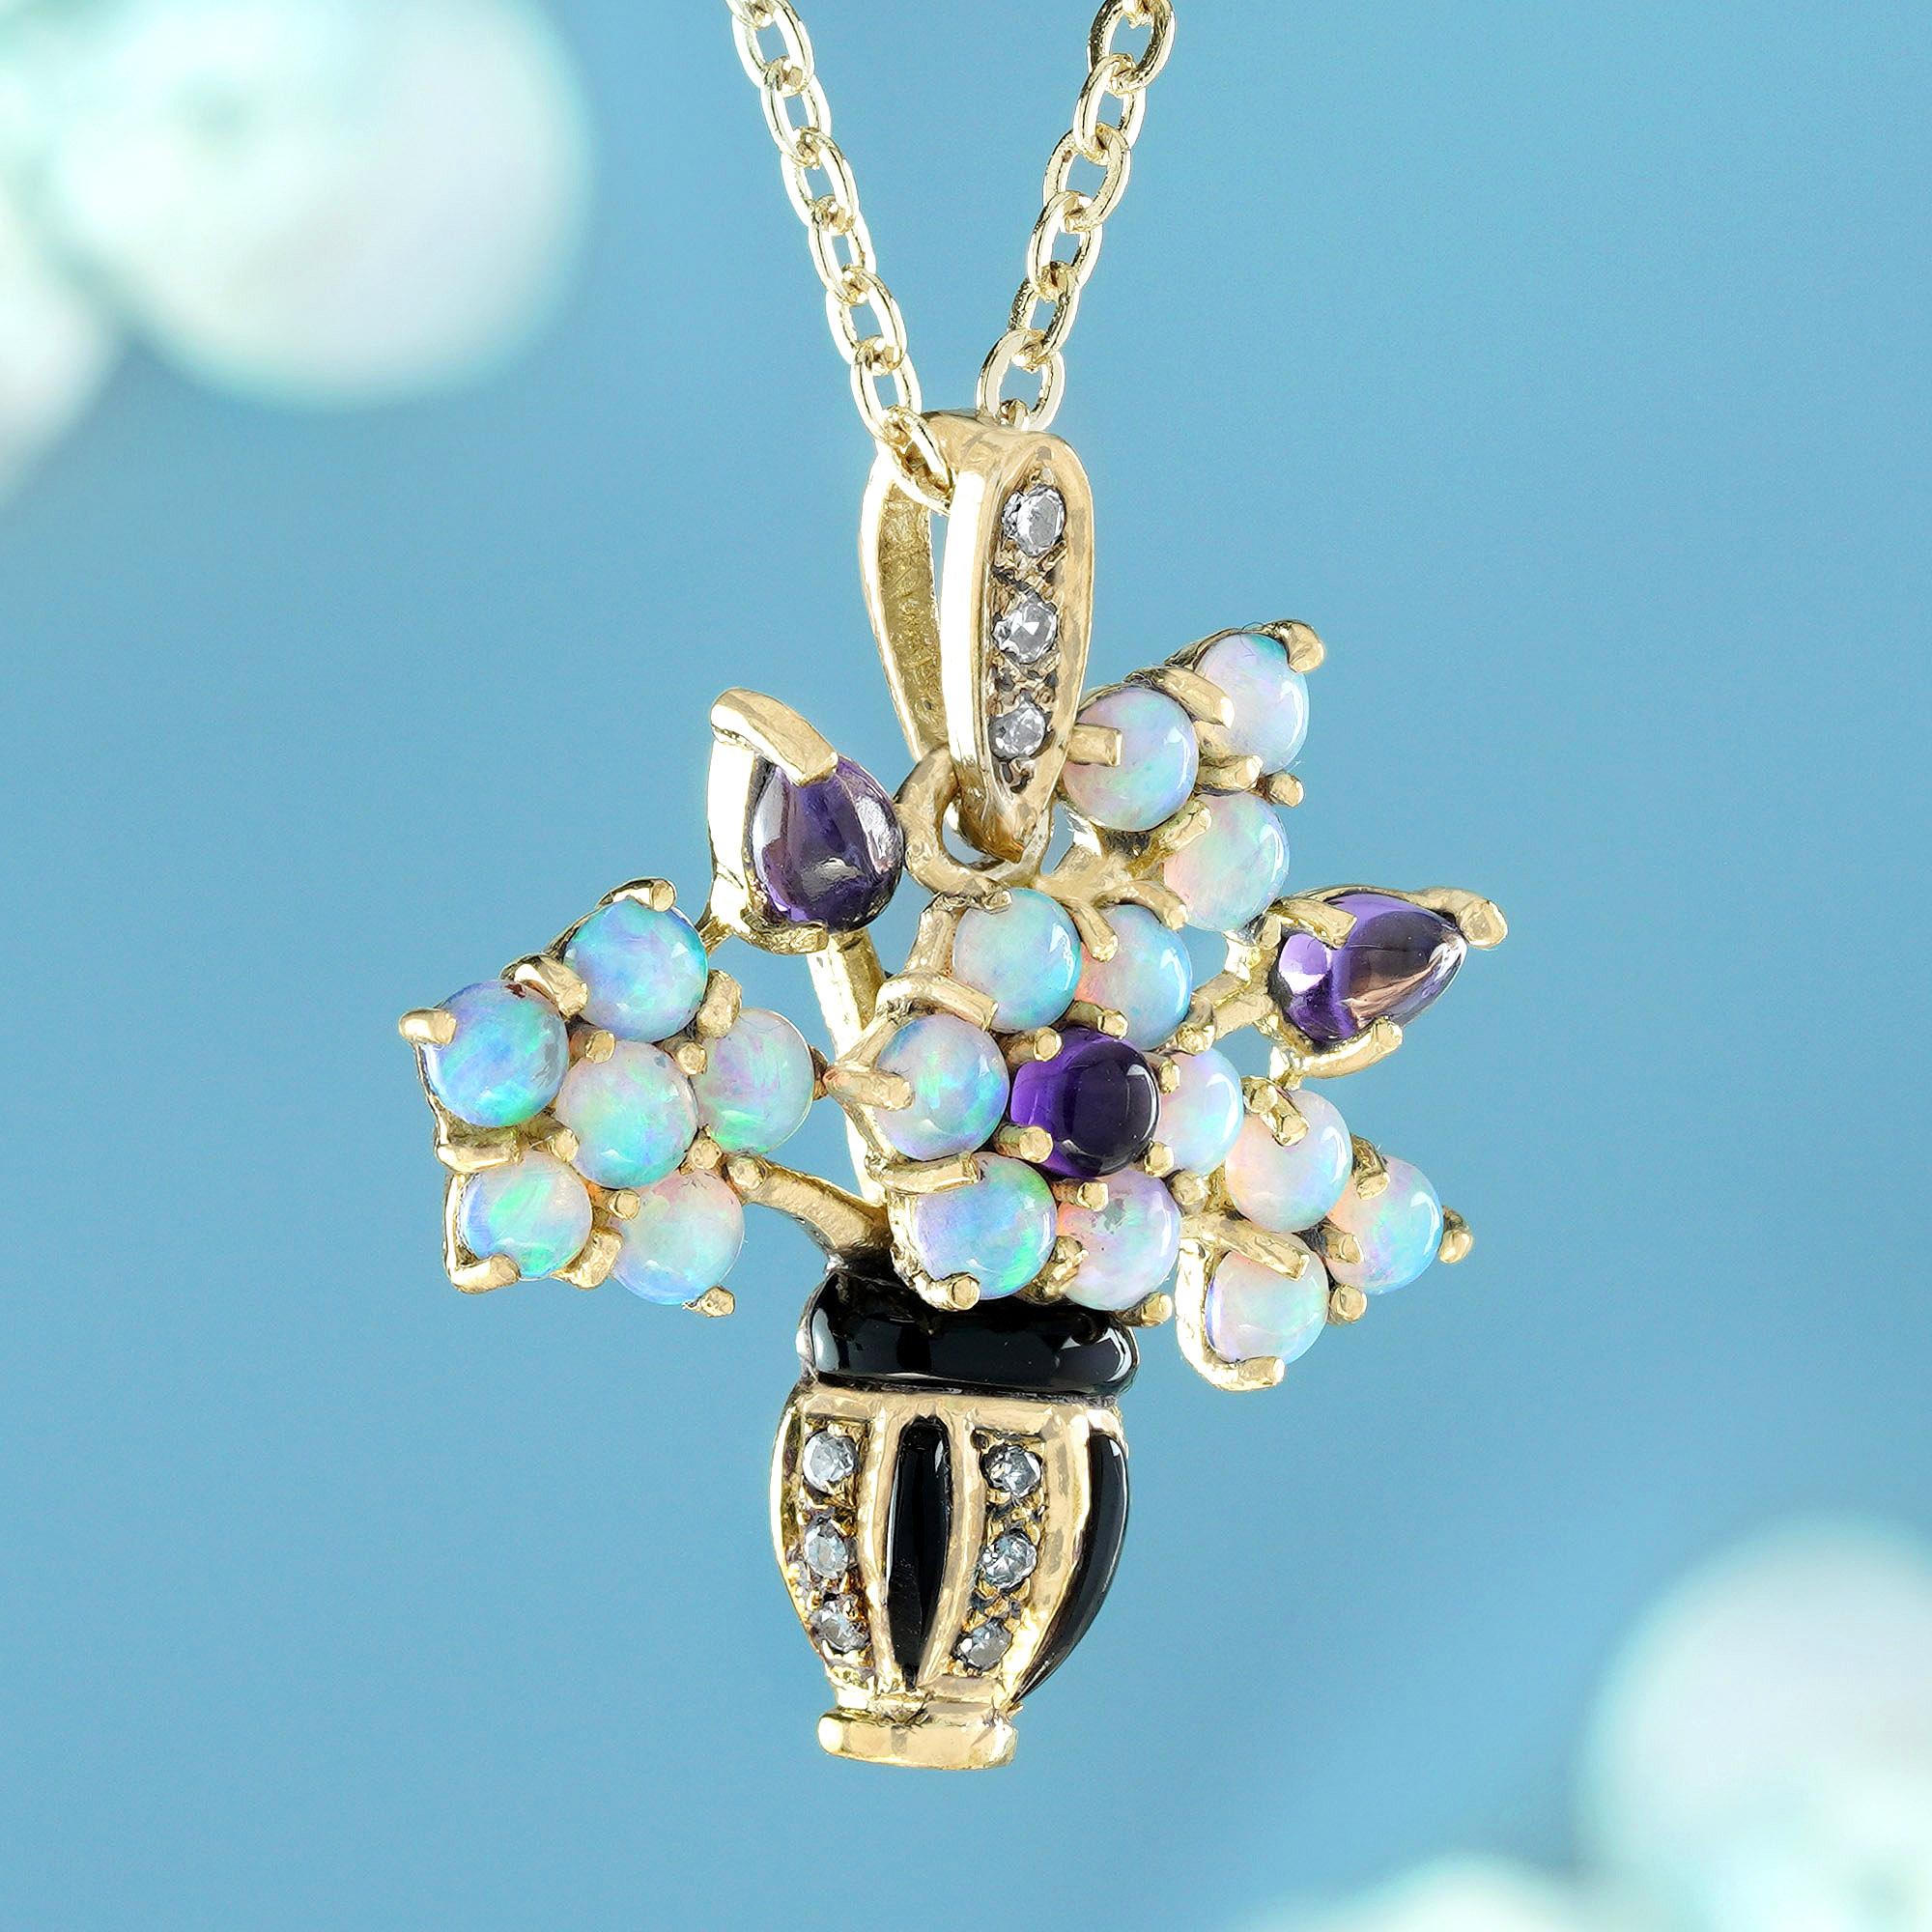   Crafted from solid yellow gold, exquisite pendant features a floral vase design adorned with a variety of gemstones in prong settings. The mix includes purple cabochon round and pear-shaped amethysts, as well as four clusters of round white opals.